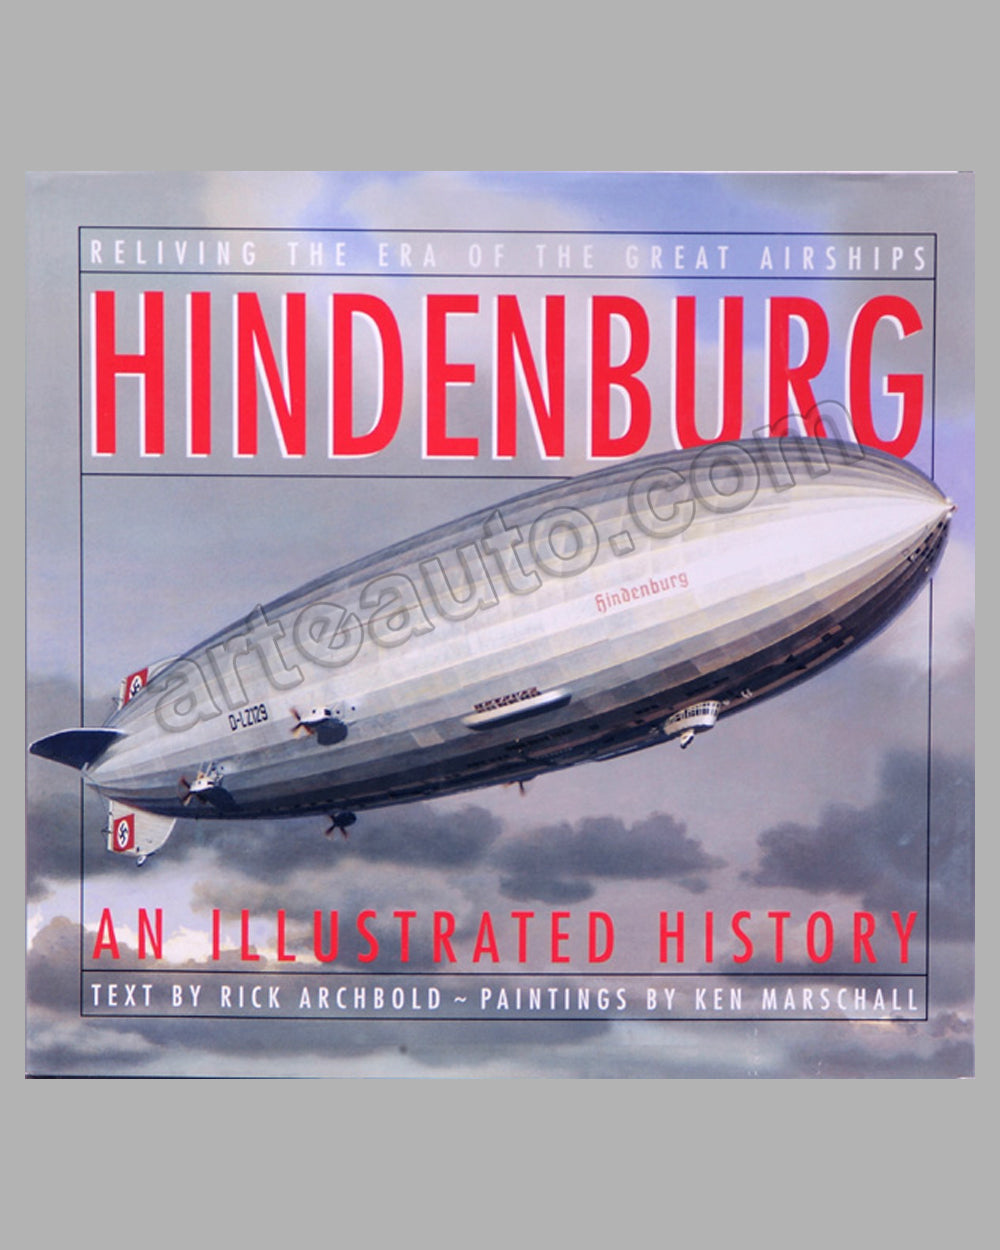 Hindenburg: An Illustrated History book by R. Archbold